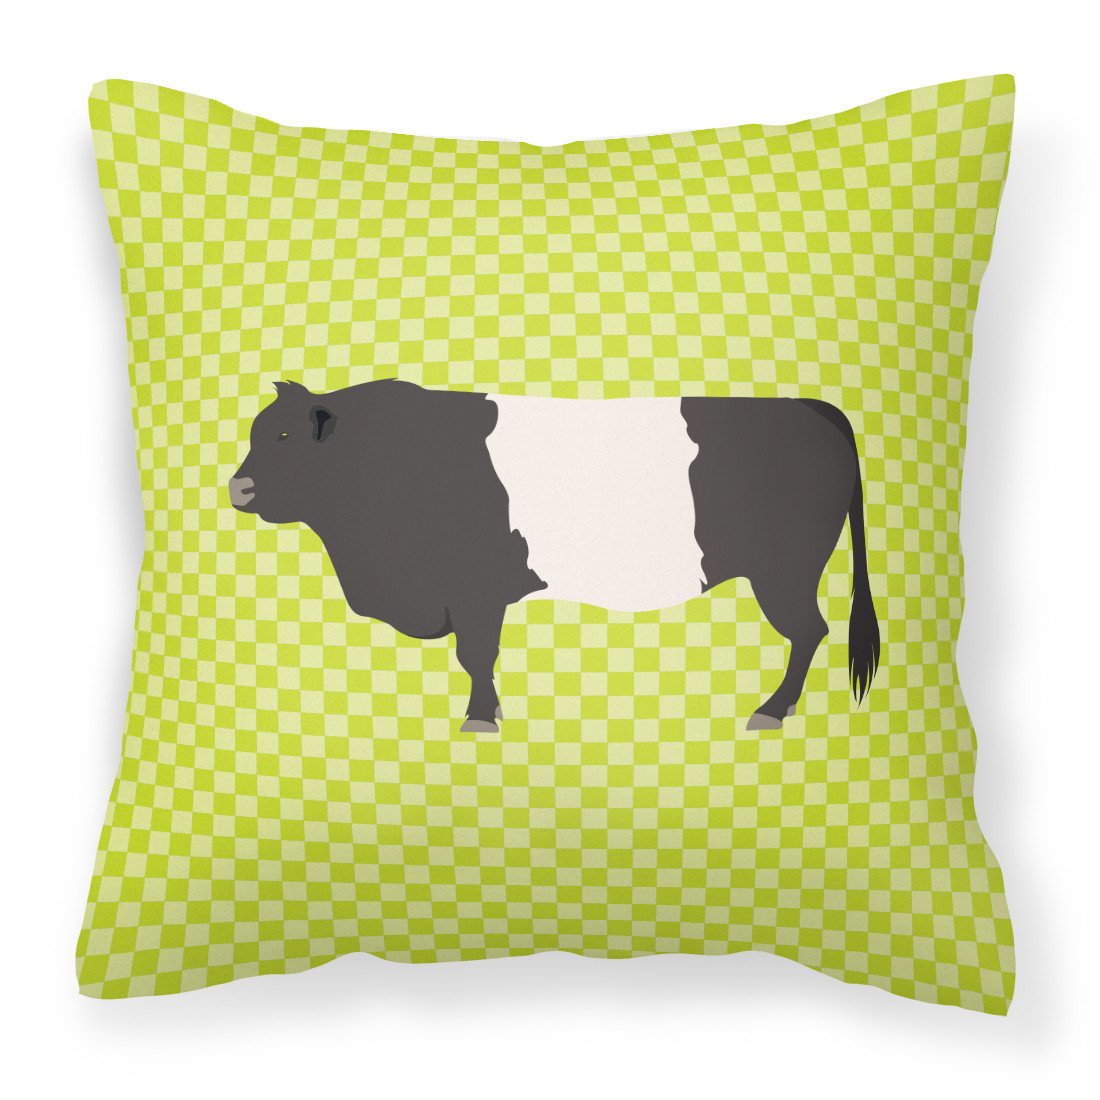 Belted Galloway Cow Green Fabric Decorative Pillow BB7657PW1818 by Caroline's Treasures